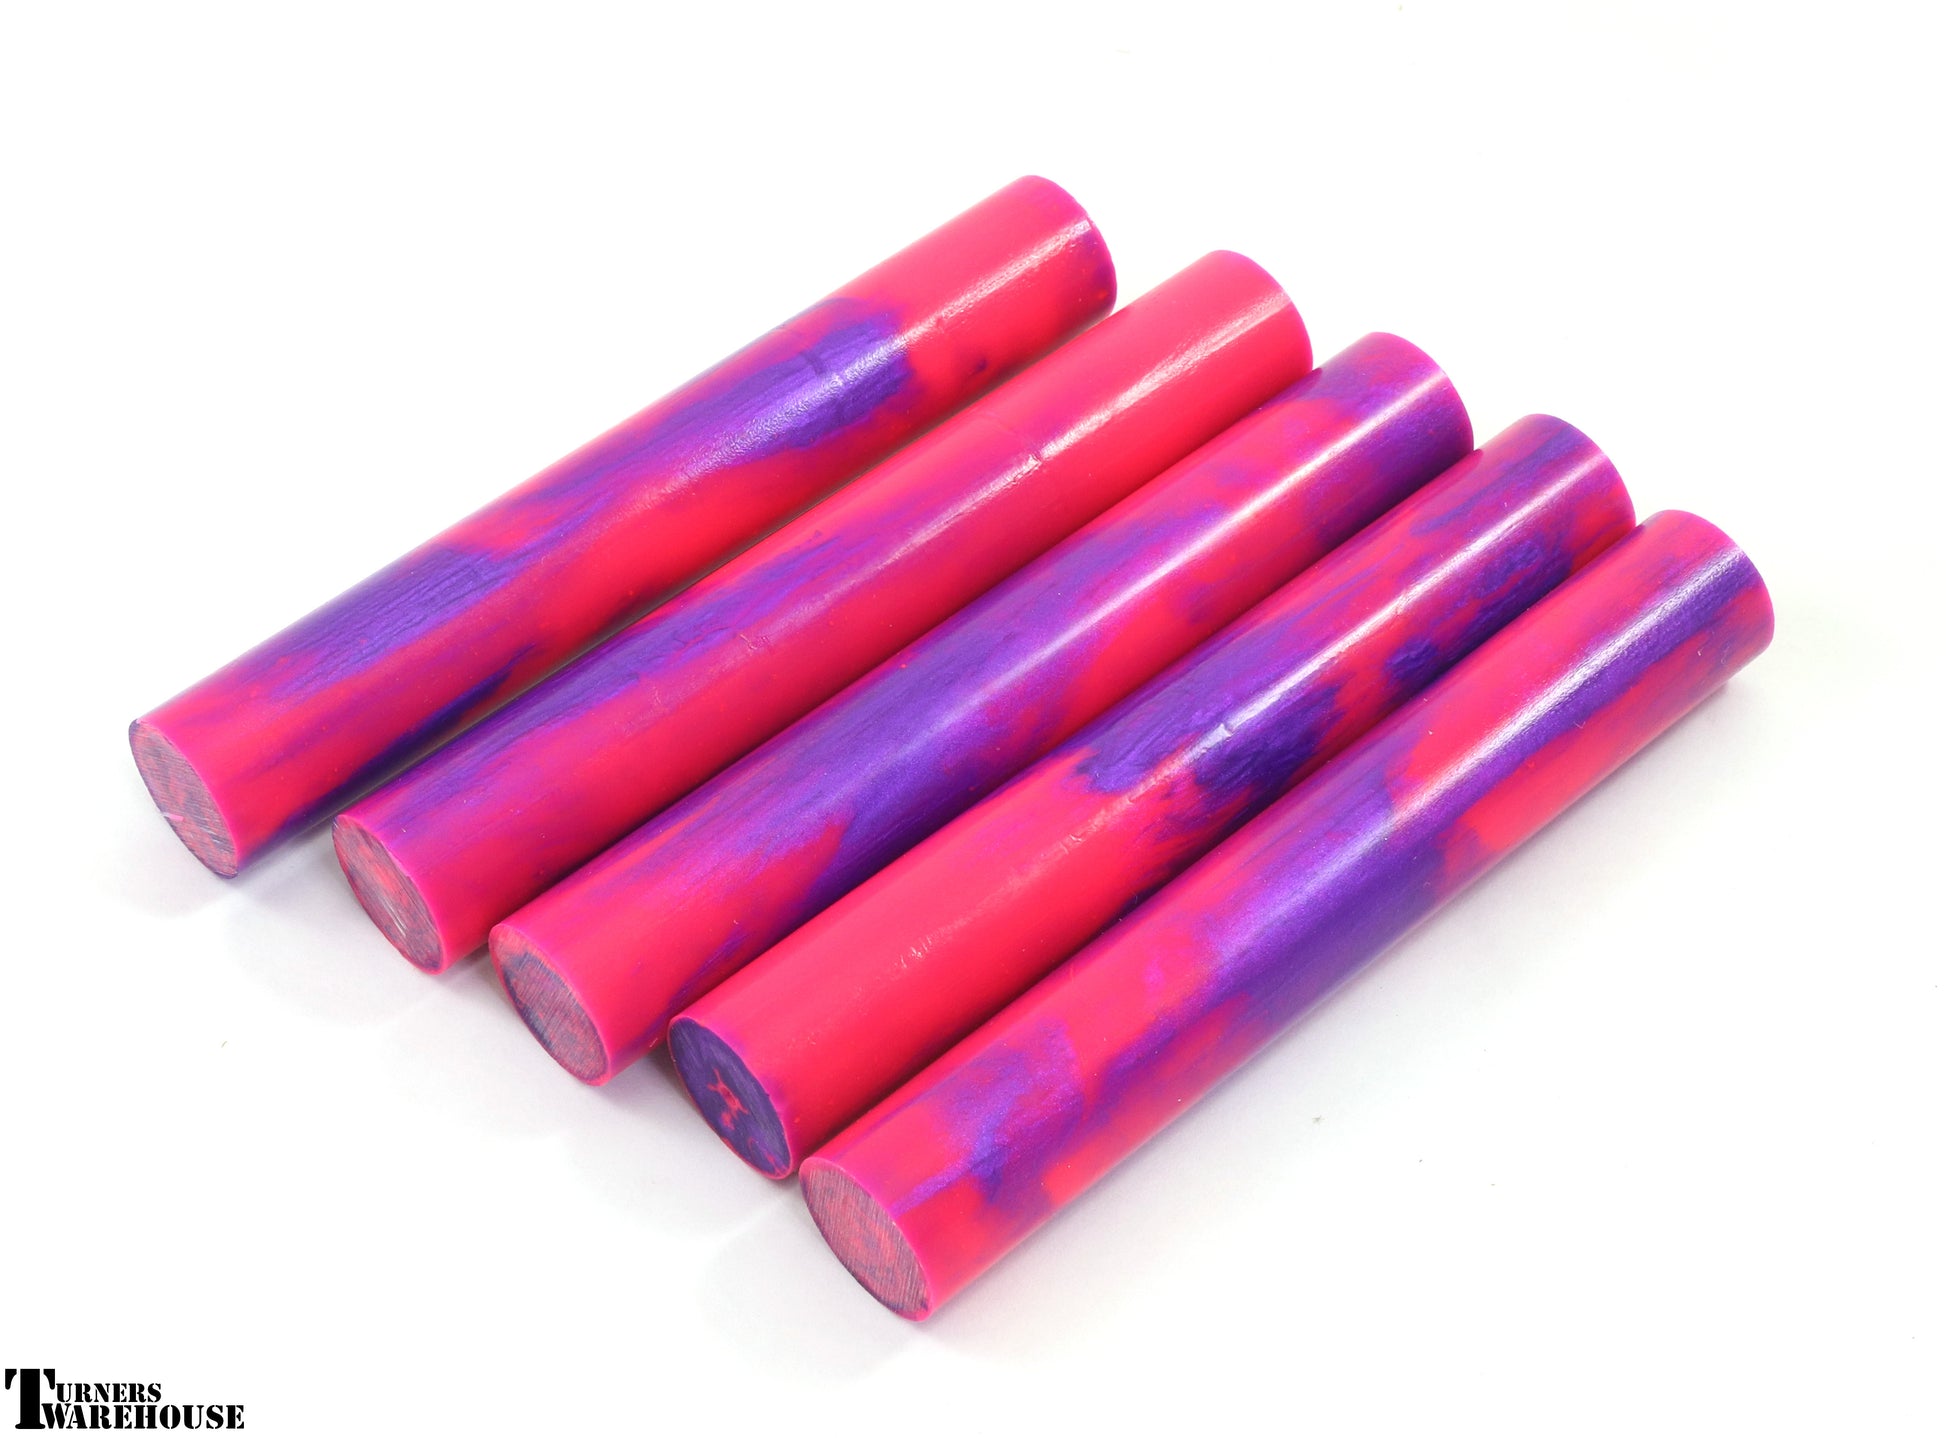 Top Choice Pen Blanks Cotton Candy Pink and purple